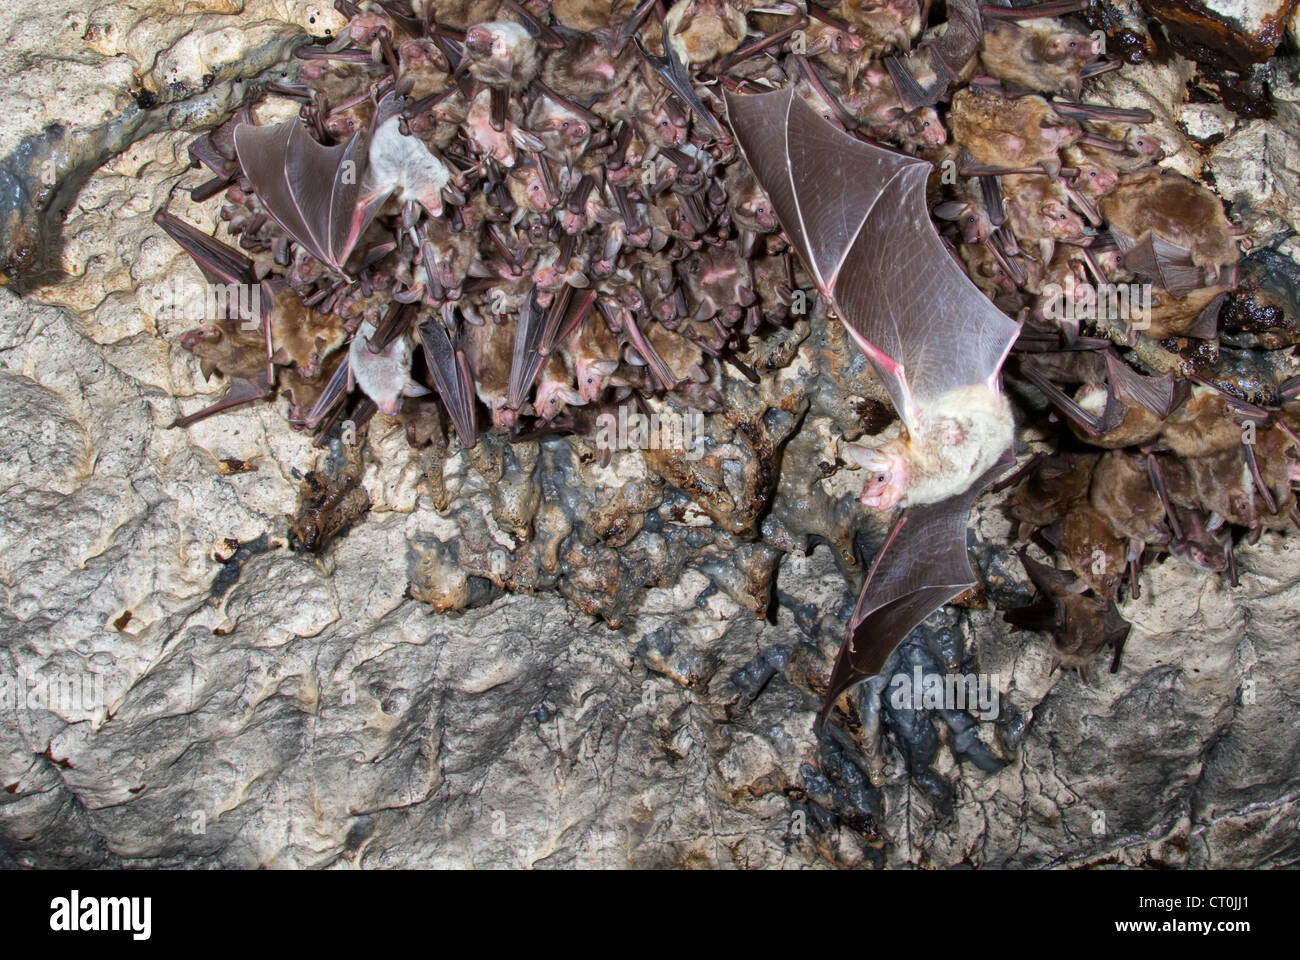 A colony of the lesser mouse-eared bats (Myotis blythii) in a cave (The Republic of Georgia, Caucasus). Stock Photo